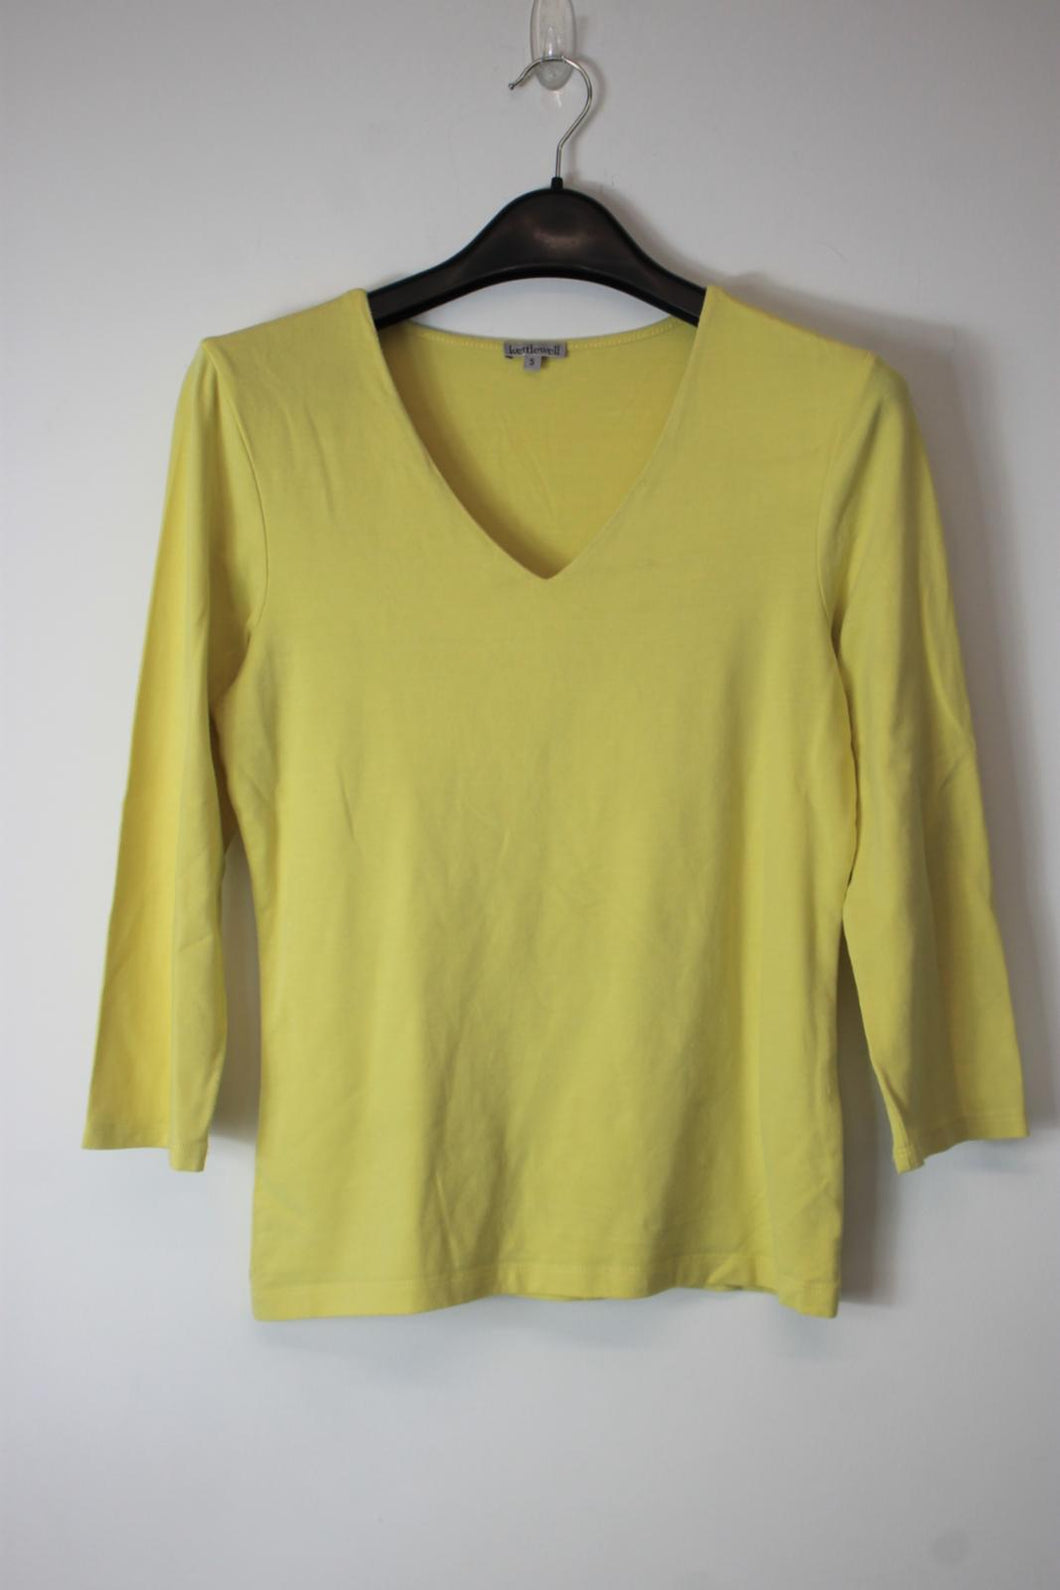 KETTLEWELL Ladies Yellow Cotton Long Sleeve V-Neck Top Size S